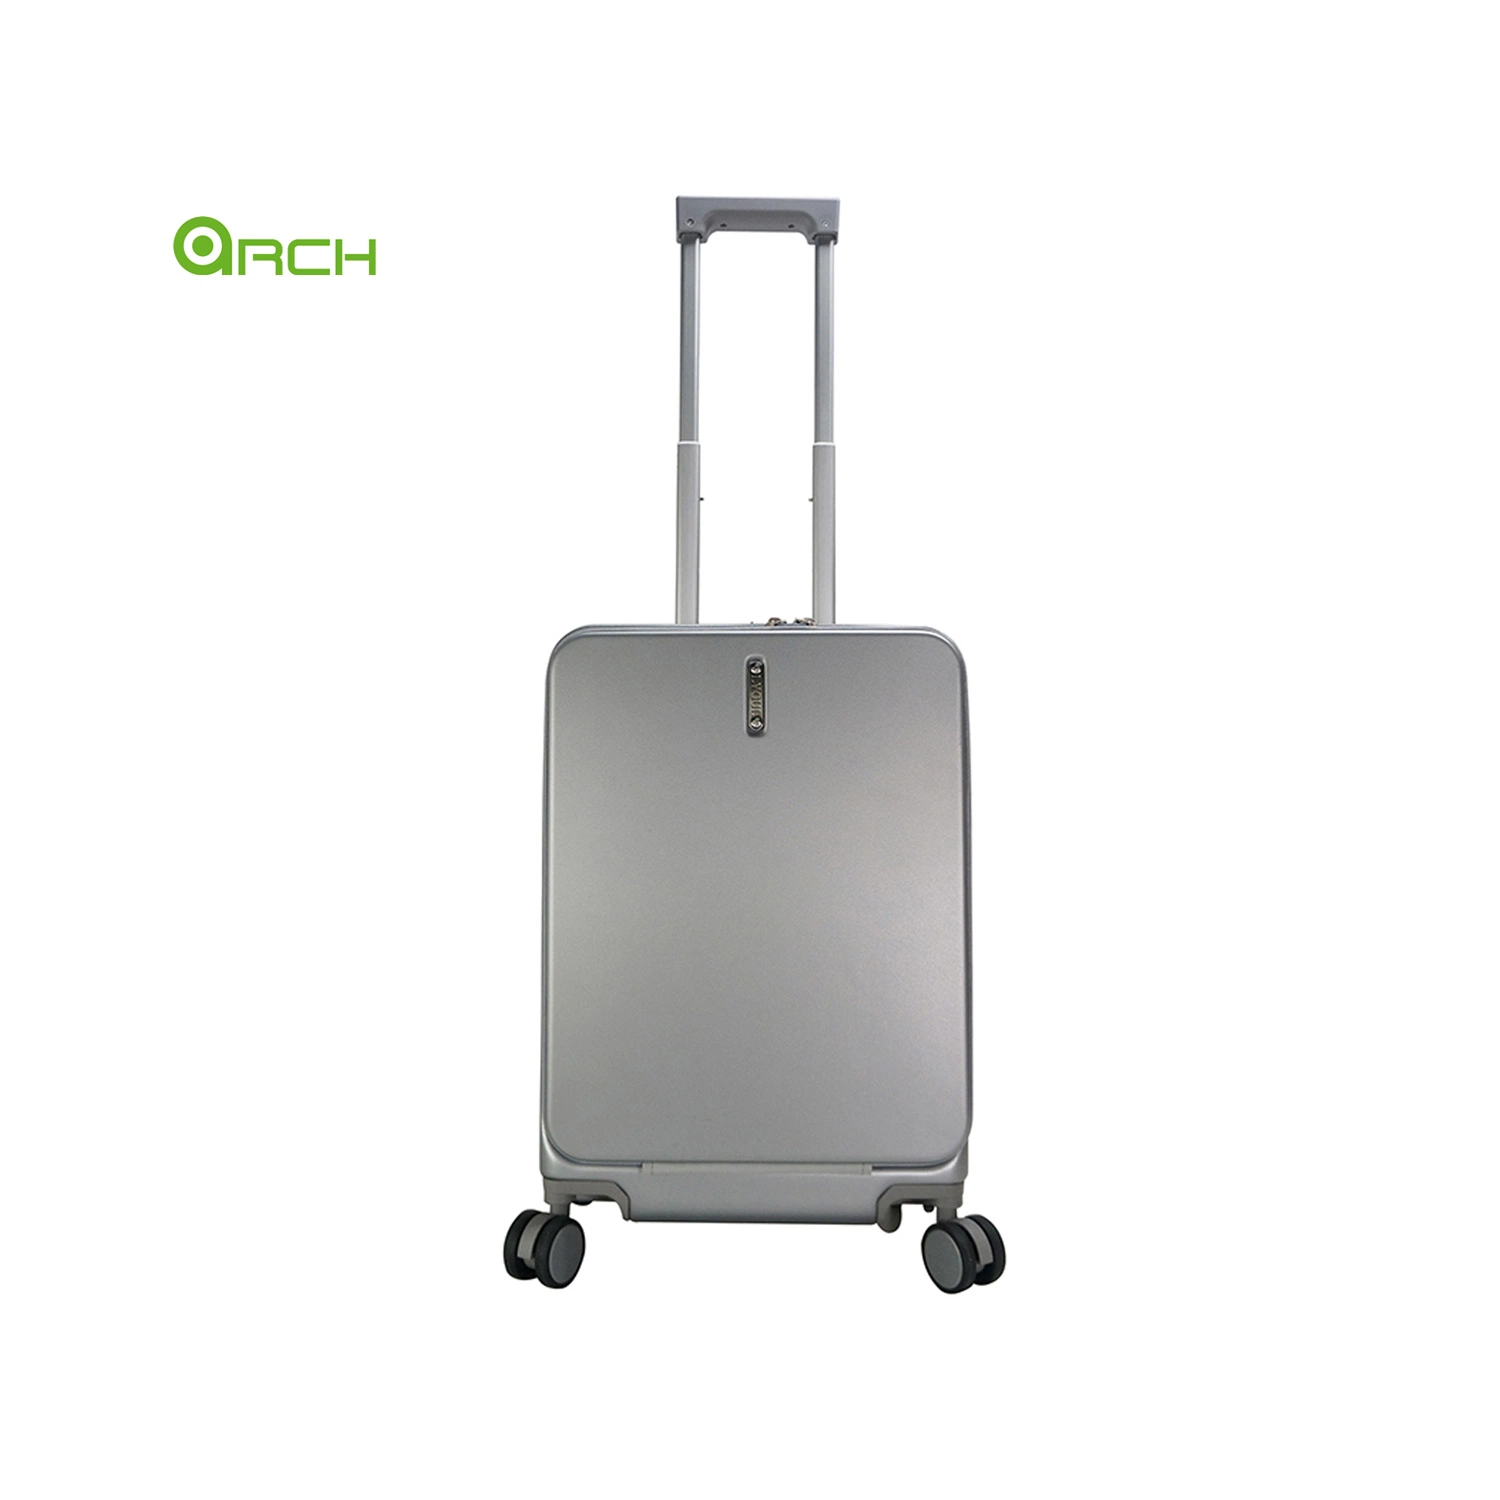 19" Abs Hard Case Trolley Luggage with Front Pocket and Flight Wheels